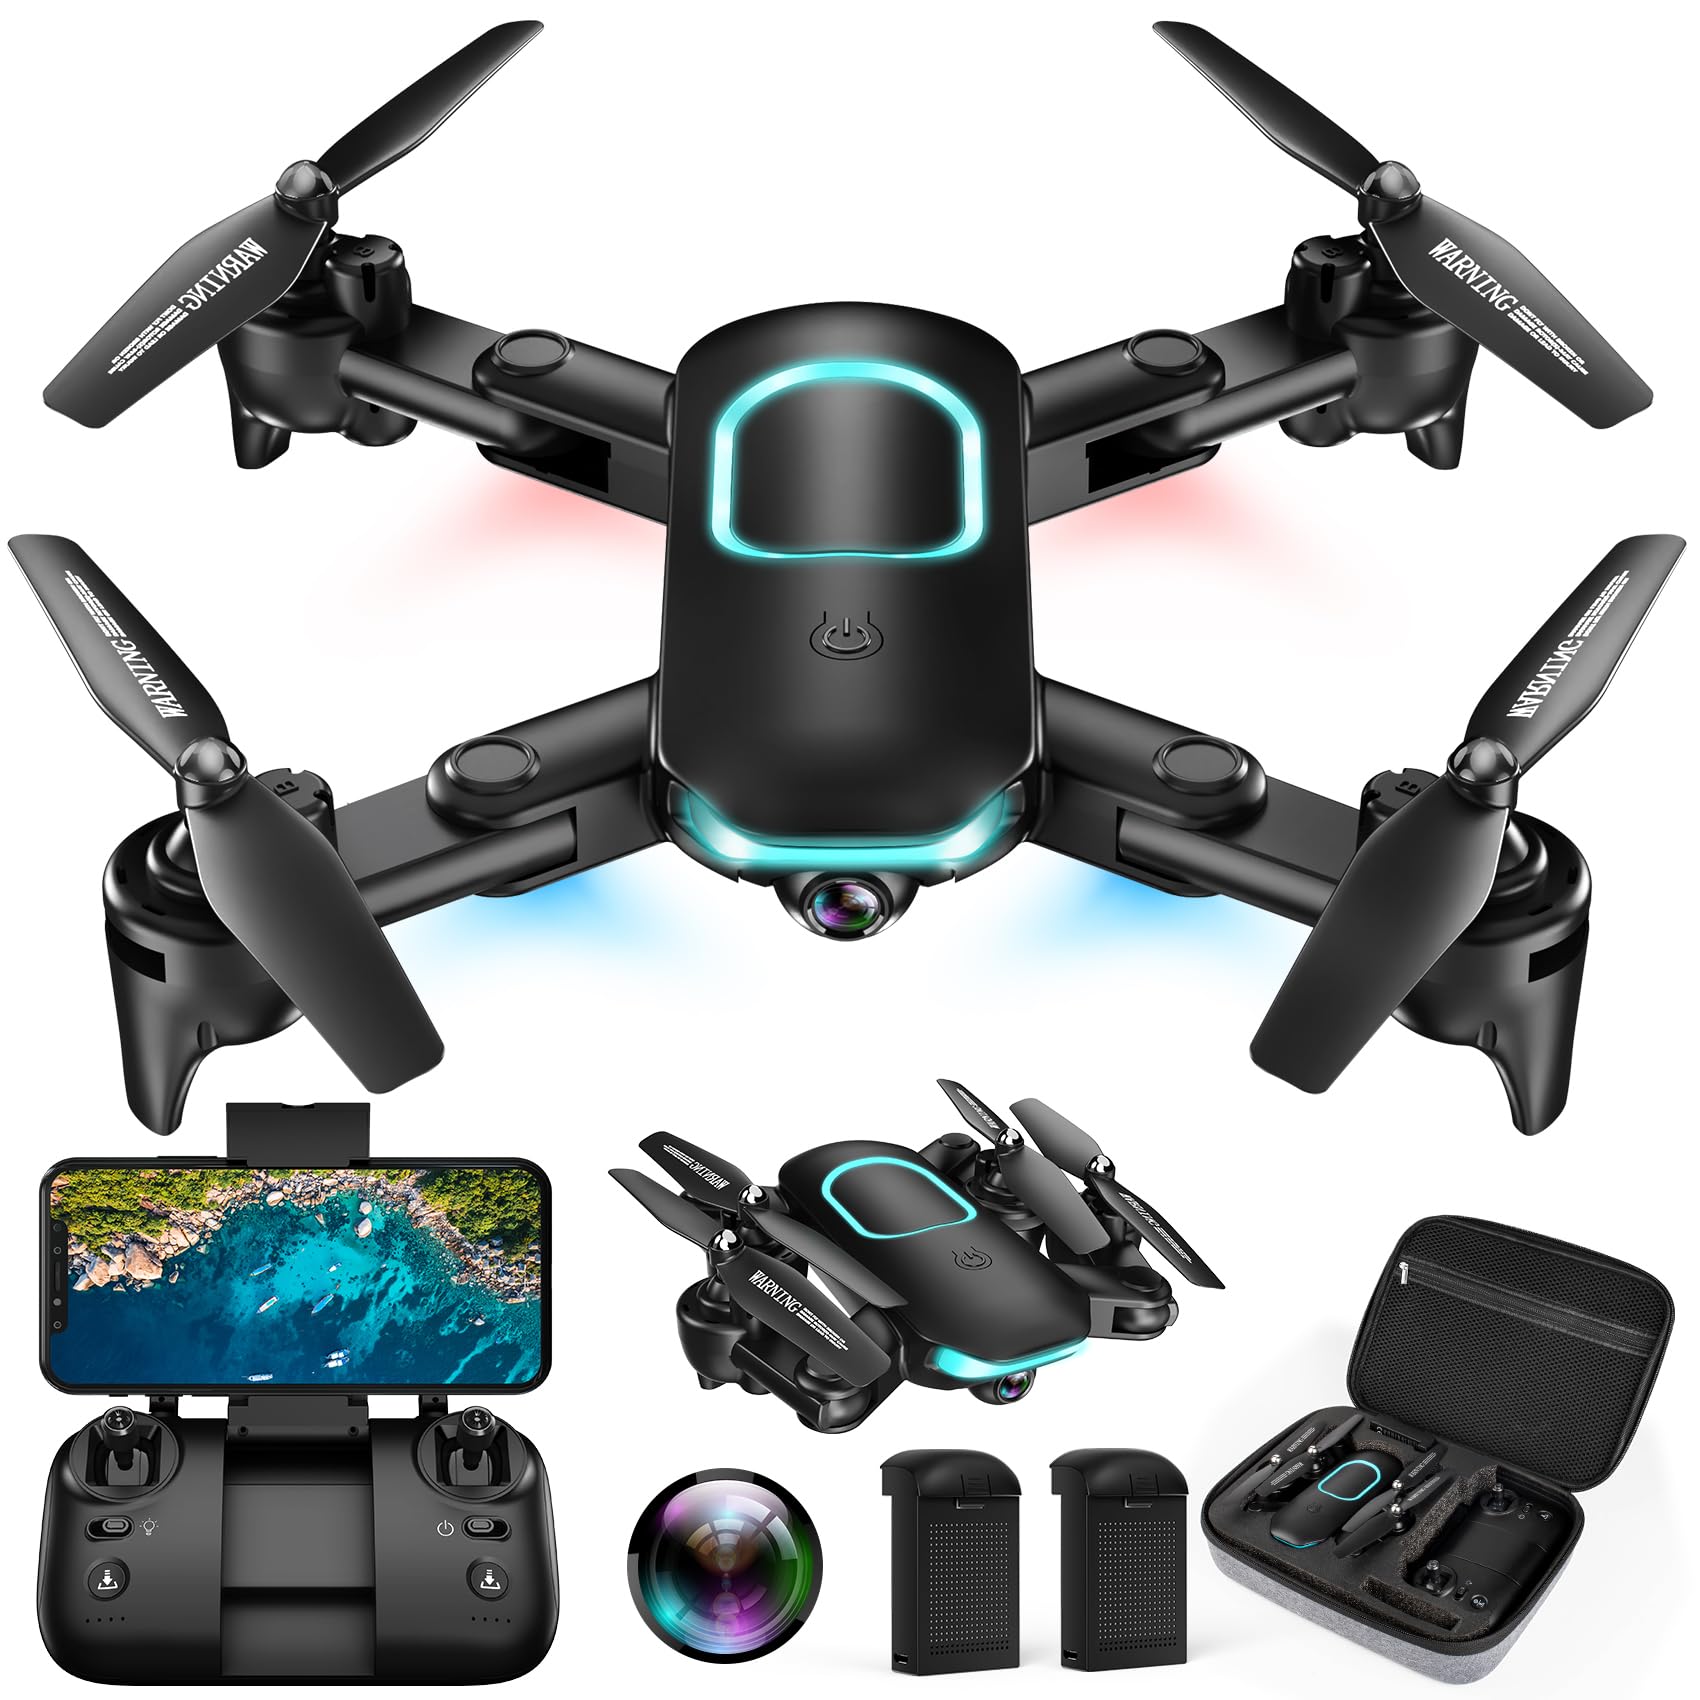 REDRIE Drone with Camera – Foldable Drone for Kids Adults with 1080P FPV Camera, Upgrade Altitude Hold, Gestures Selfie, Waypoint Fly, Headless Mode, 3D Flip, One Key Start, 3 Speed Mode, Circle Fly, 2 Batteries